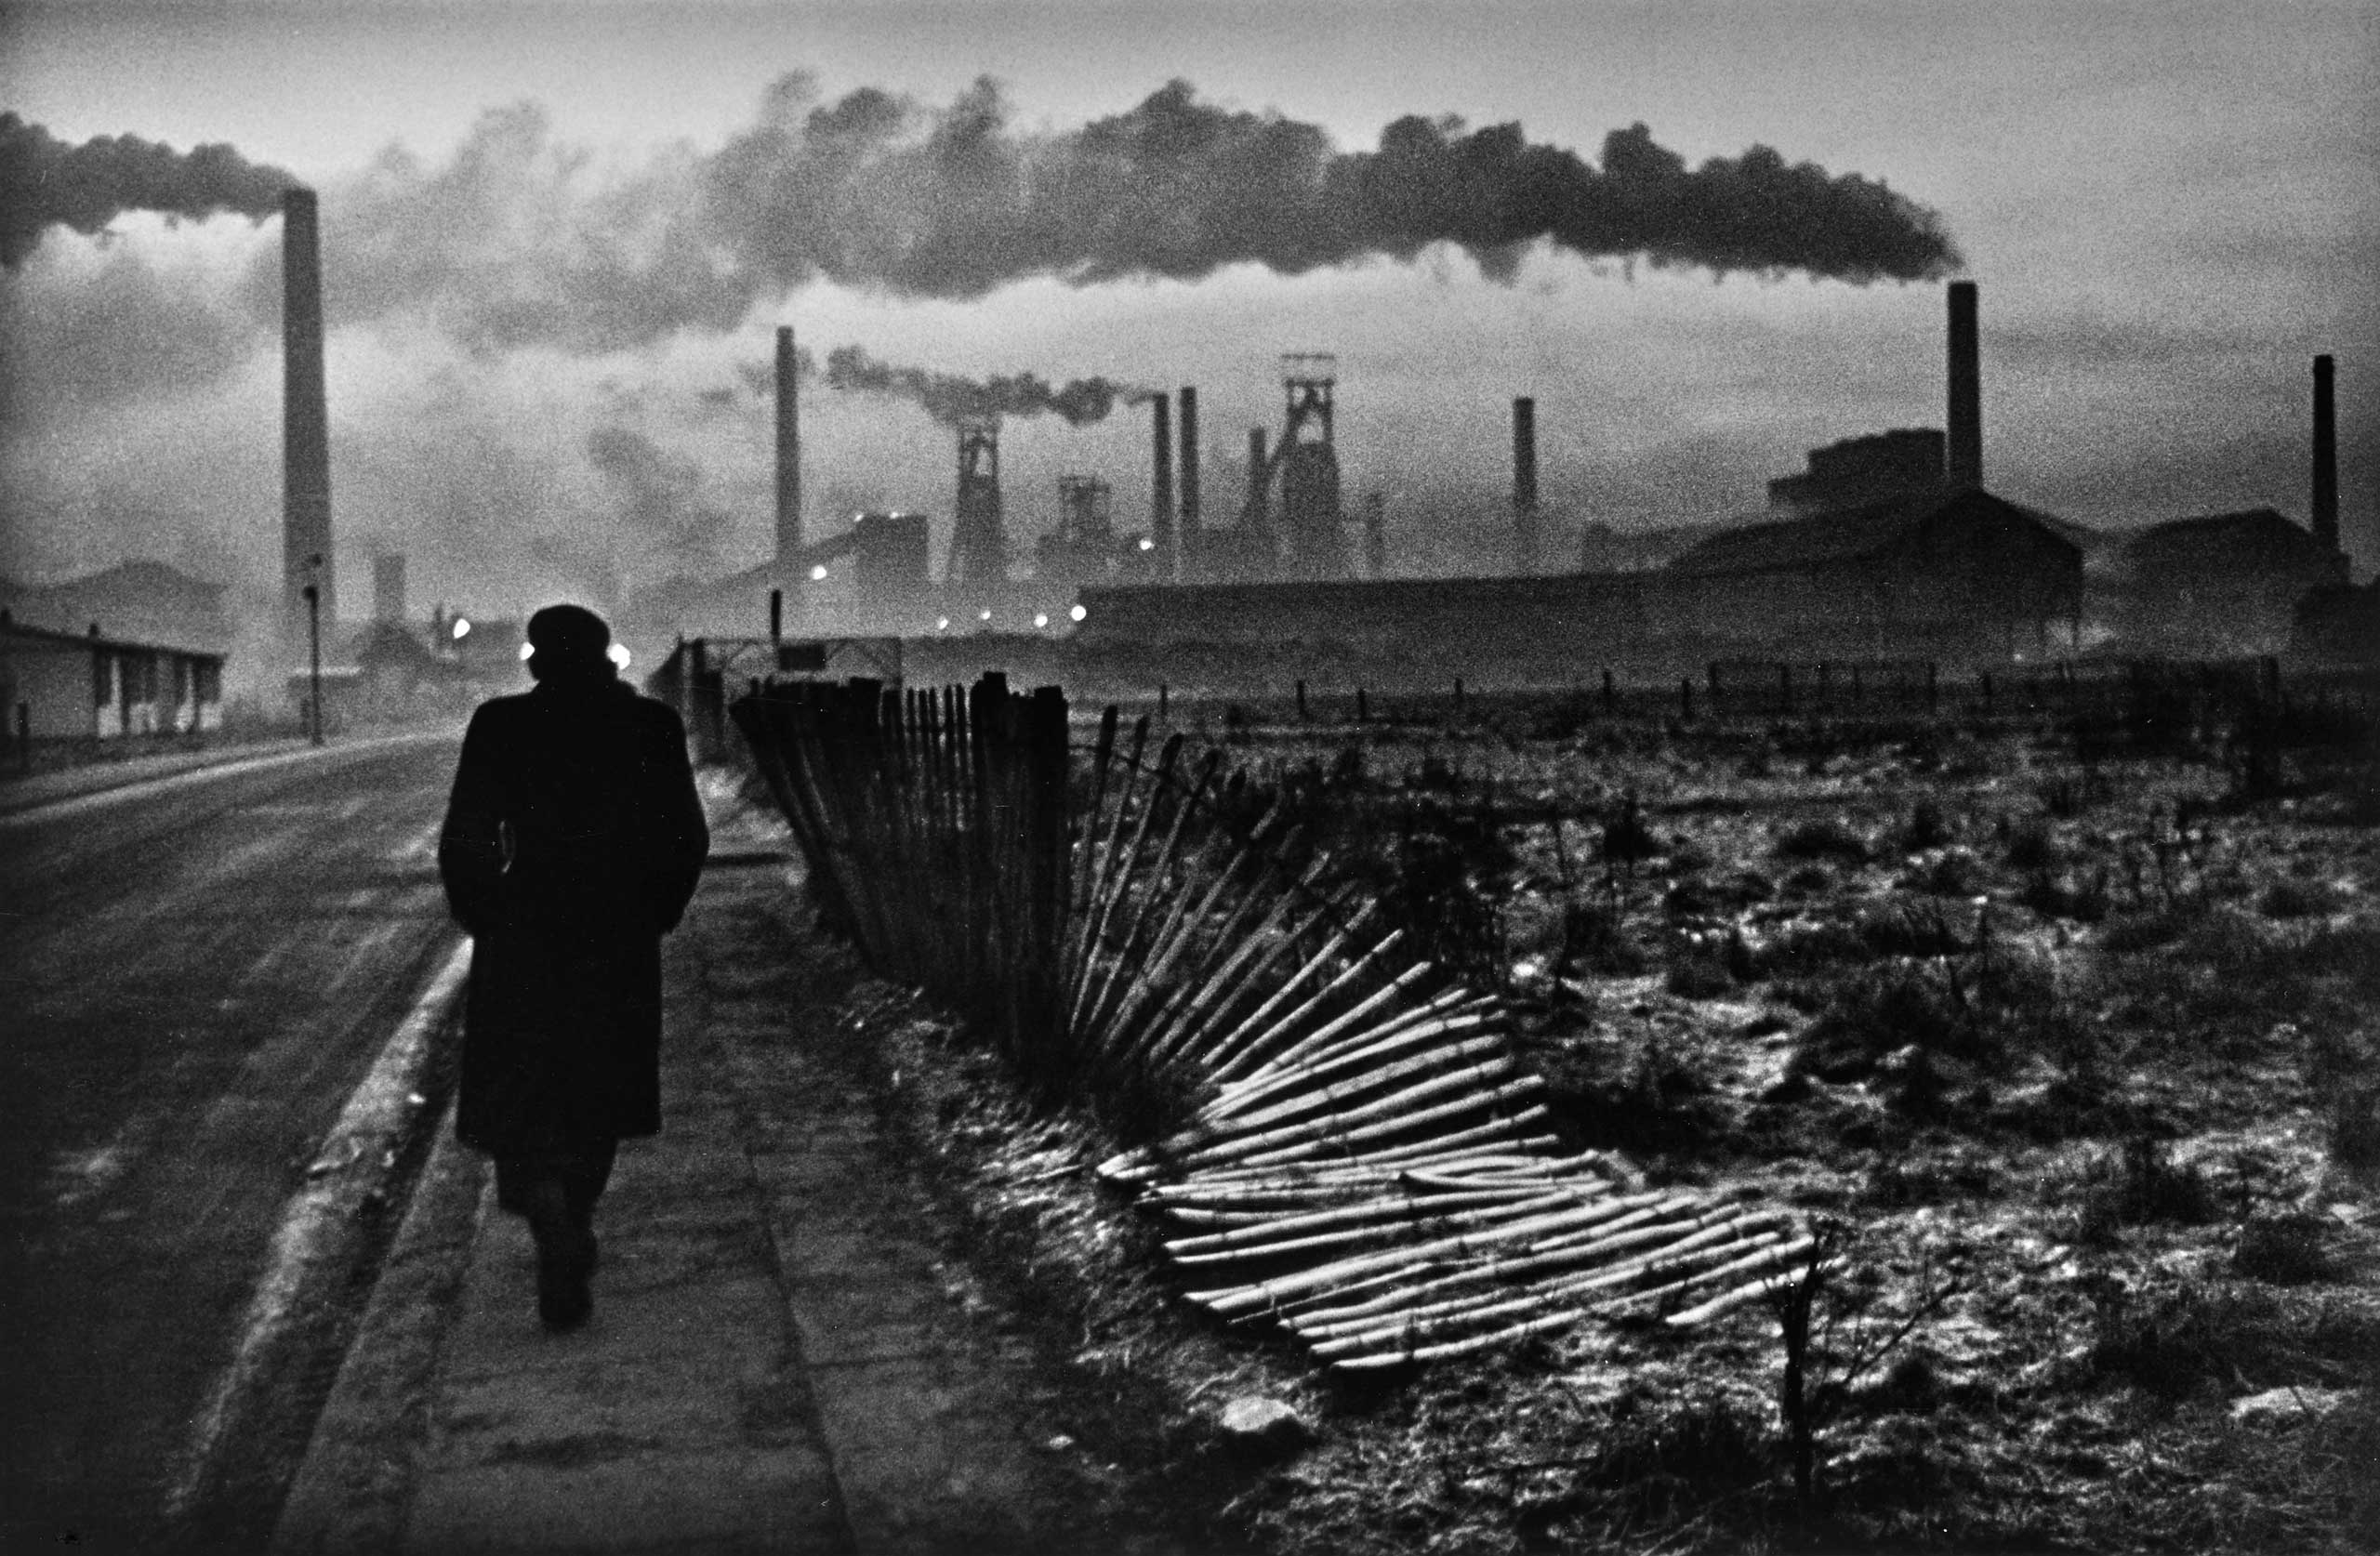 Early Morning, West Hartlepool, 1963